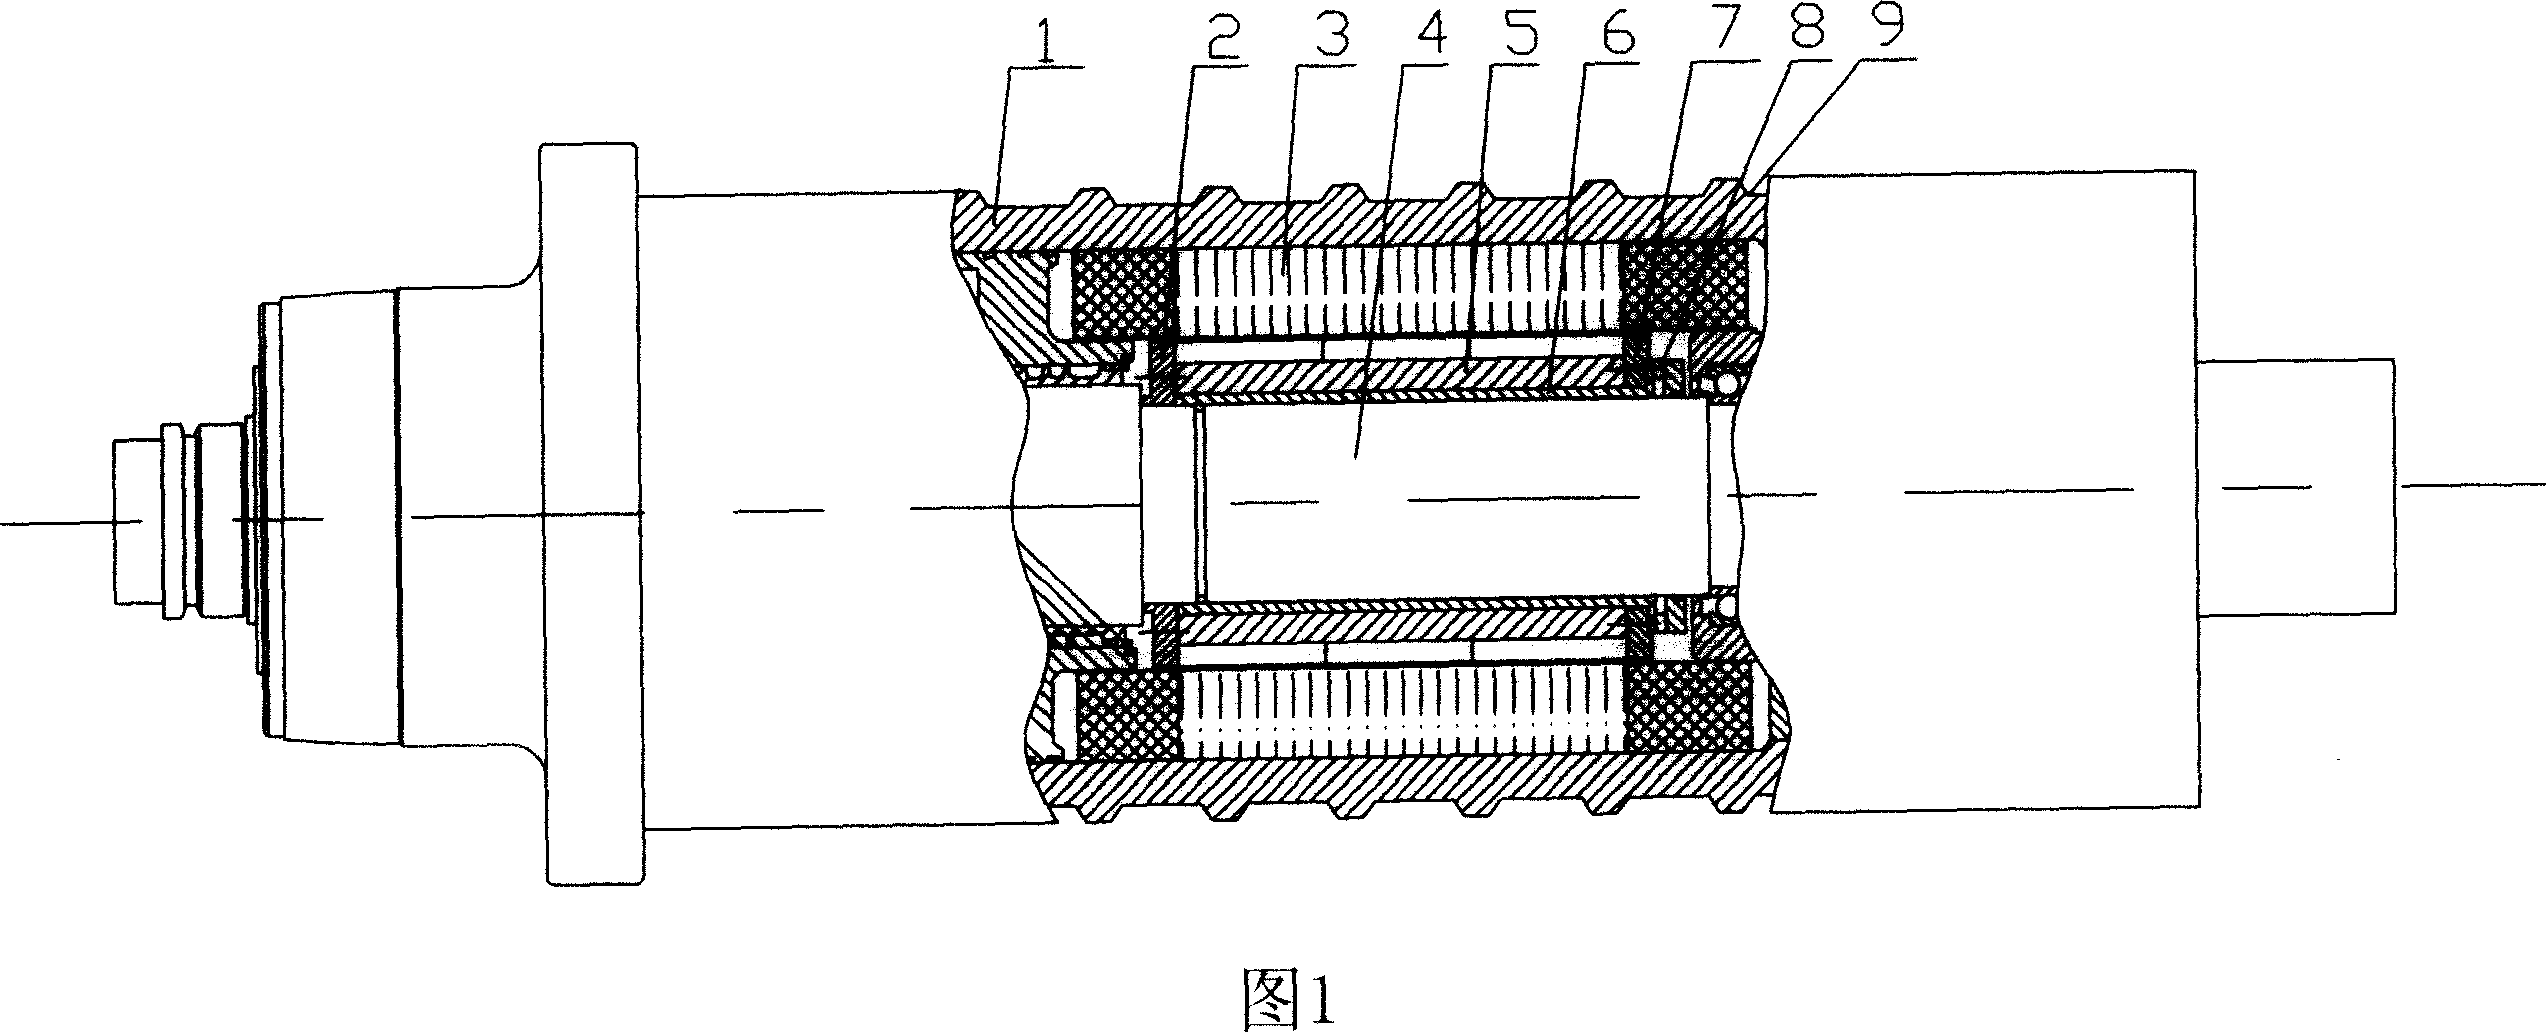 Electrical spindle drived by AC permanent magnet synchronous motor